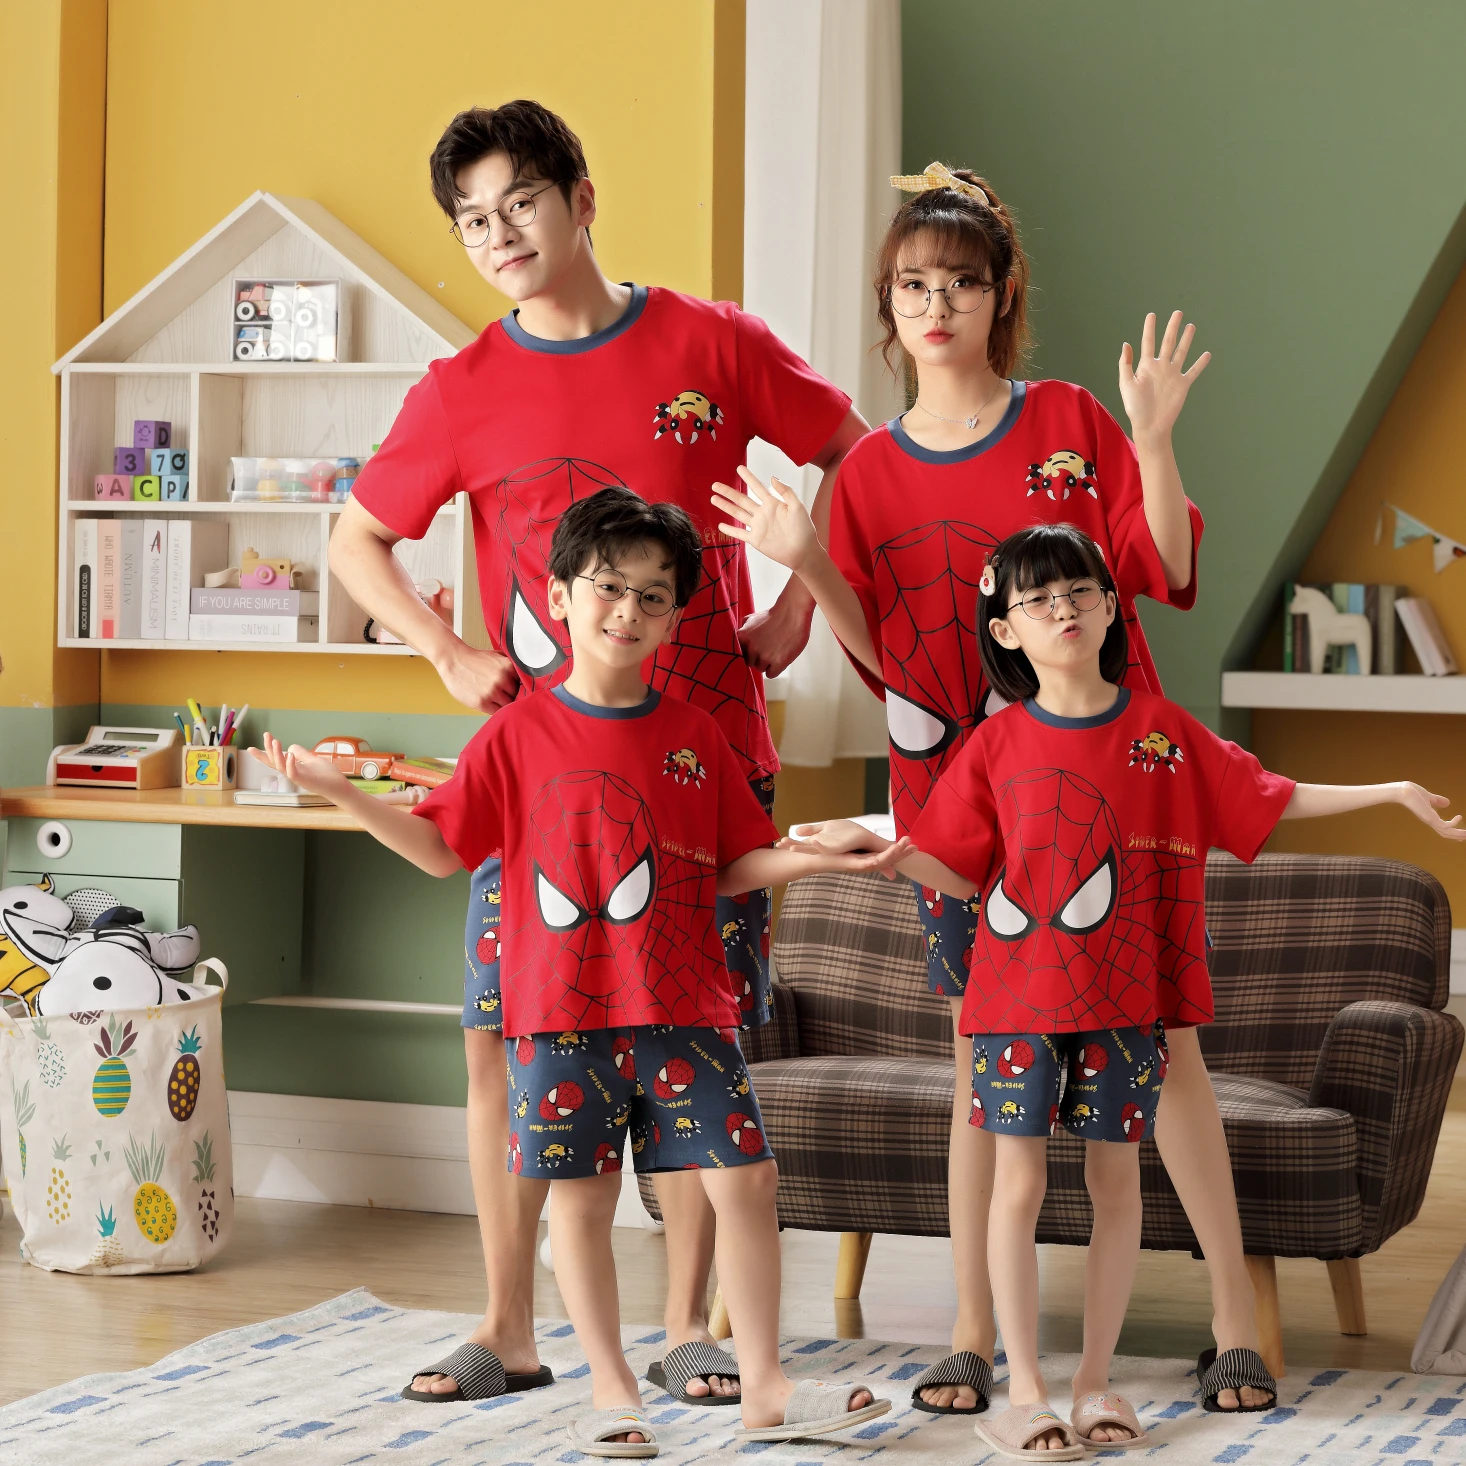 

Summer Cute Family Matching Clothes Cartoon Pajamas Set Loungewear Home wear Kids Pijamas Daddy Mommy And Me Outfits Sleepwear, Red